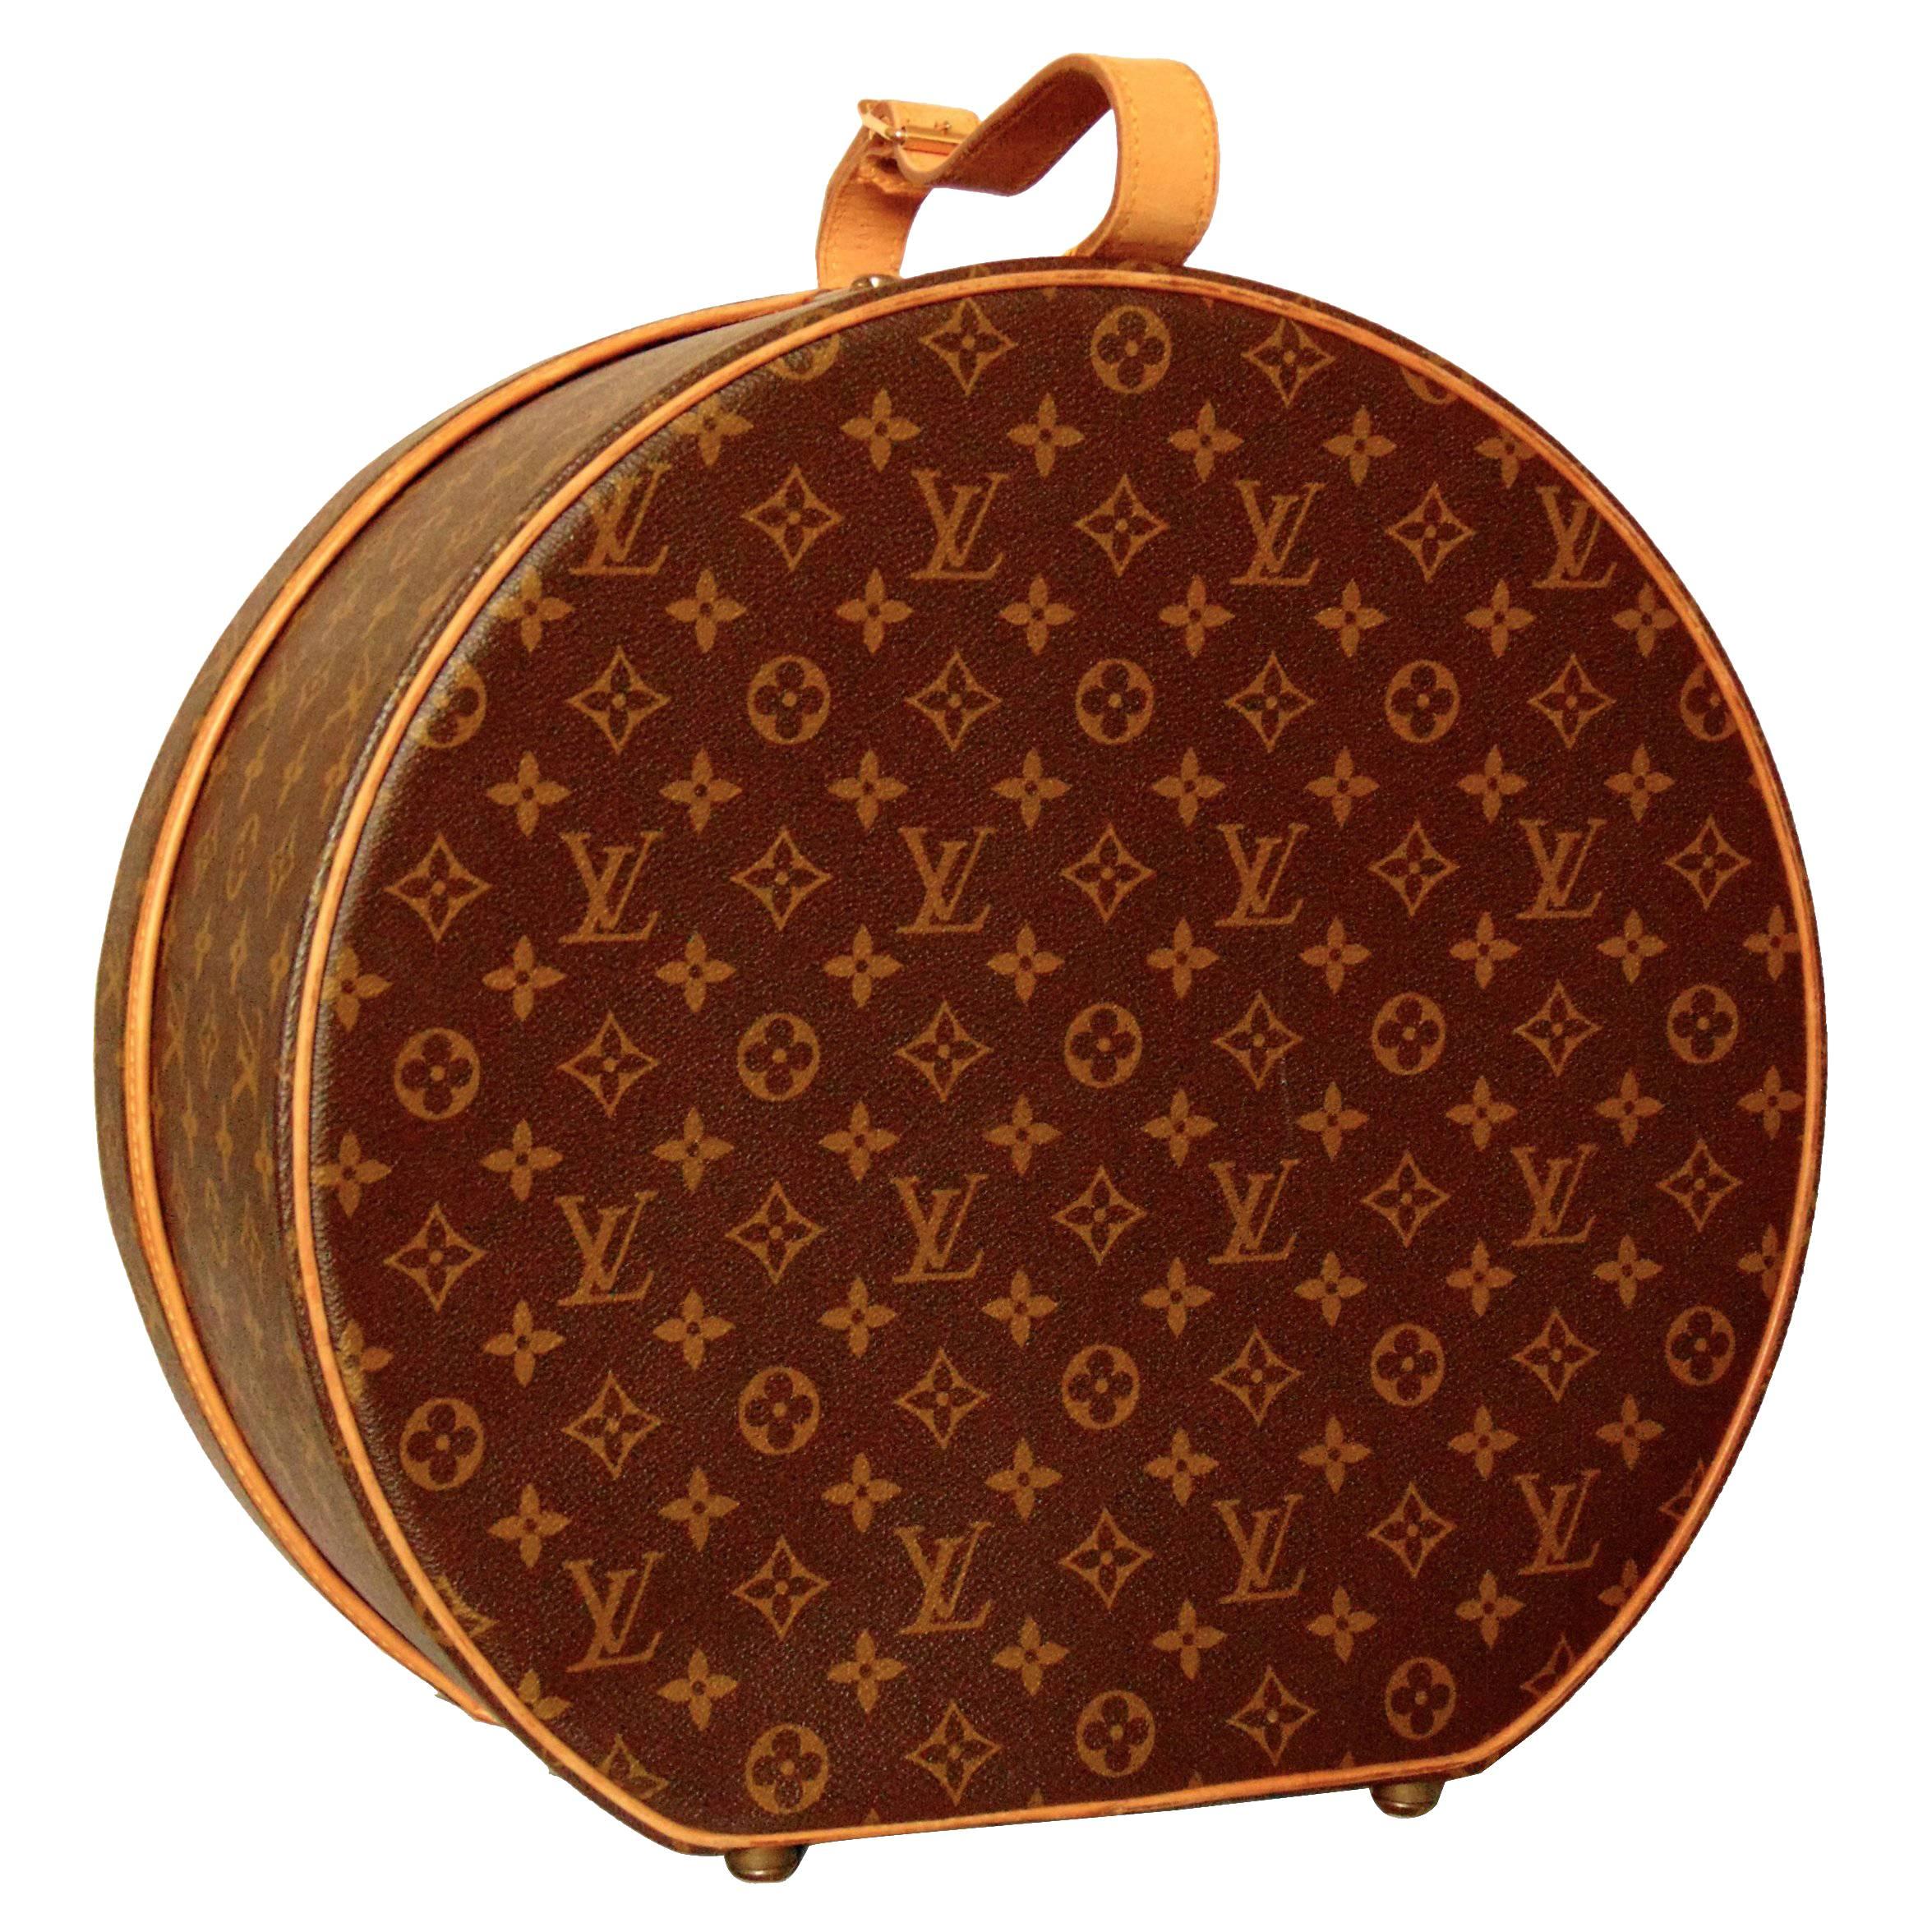 Travel in style with this classic hat box from Louis Vuitton.  Crafted in 1981, this piece features their signature monogram canvas and is trimmed in natural vachetta leather.  The interior is lined in canvas and features one large elasticized